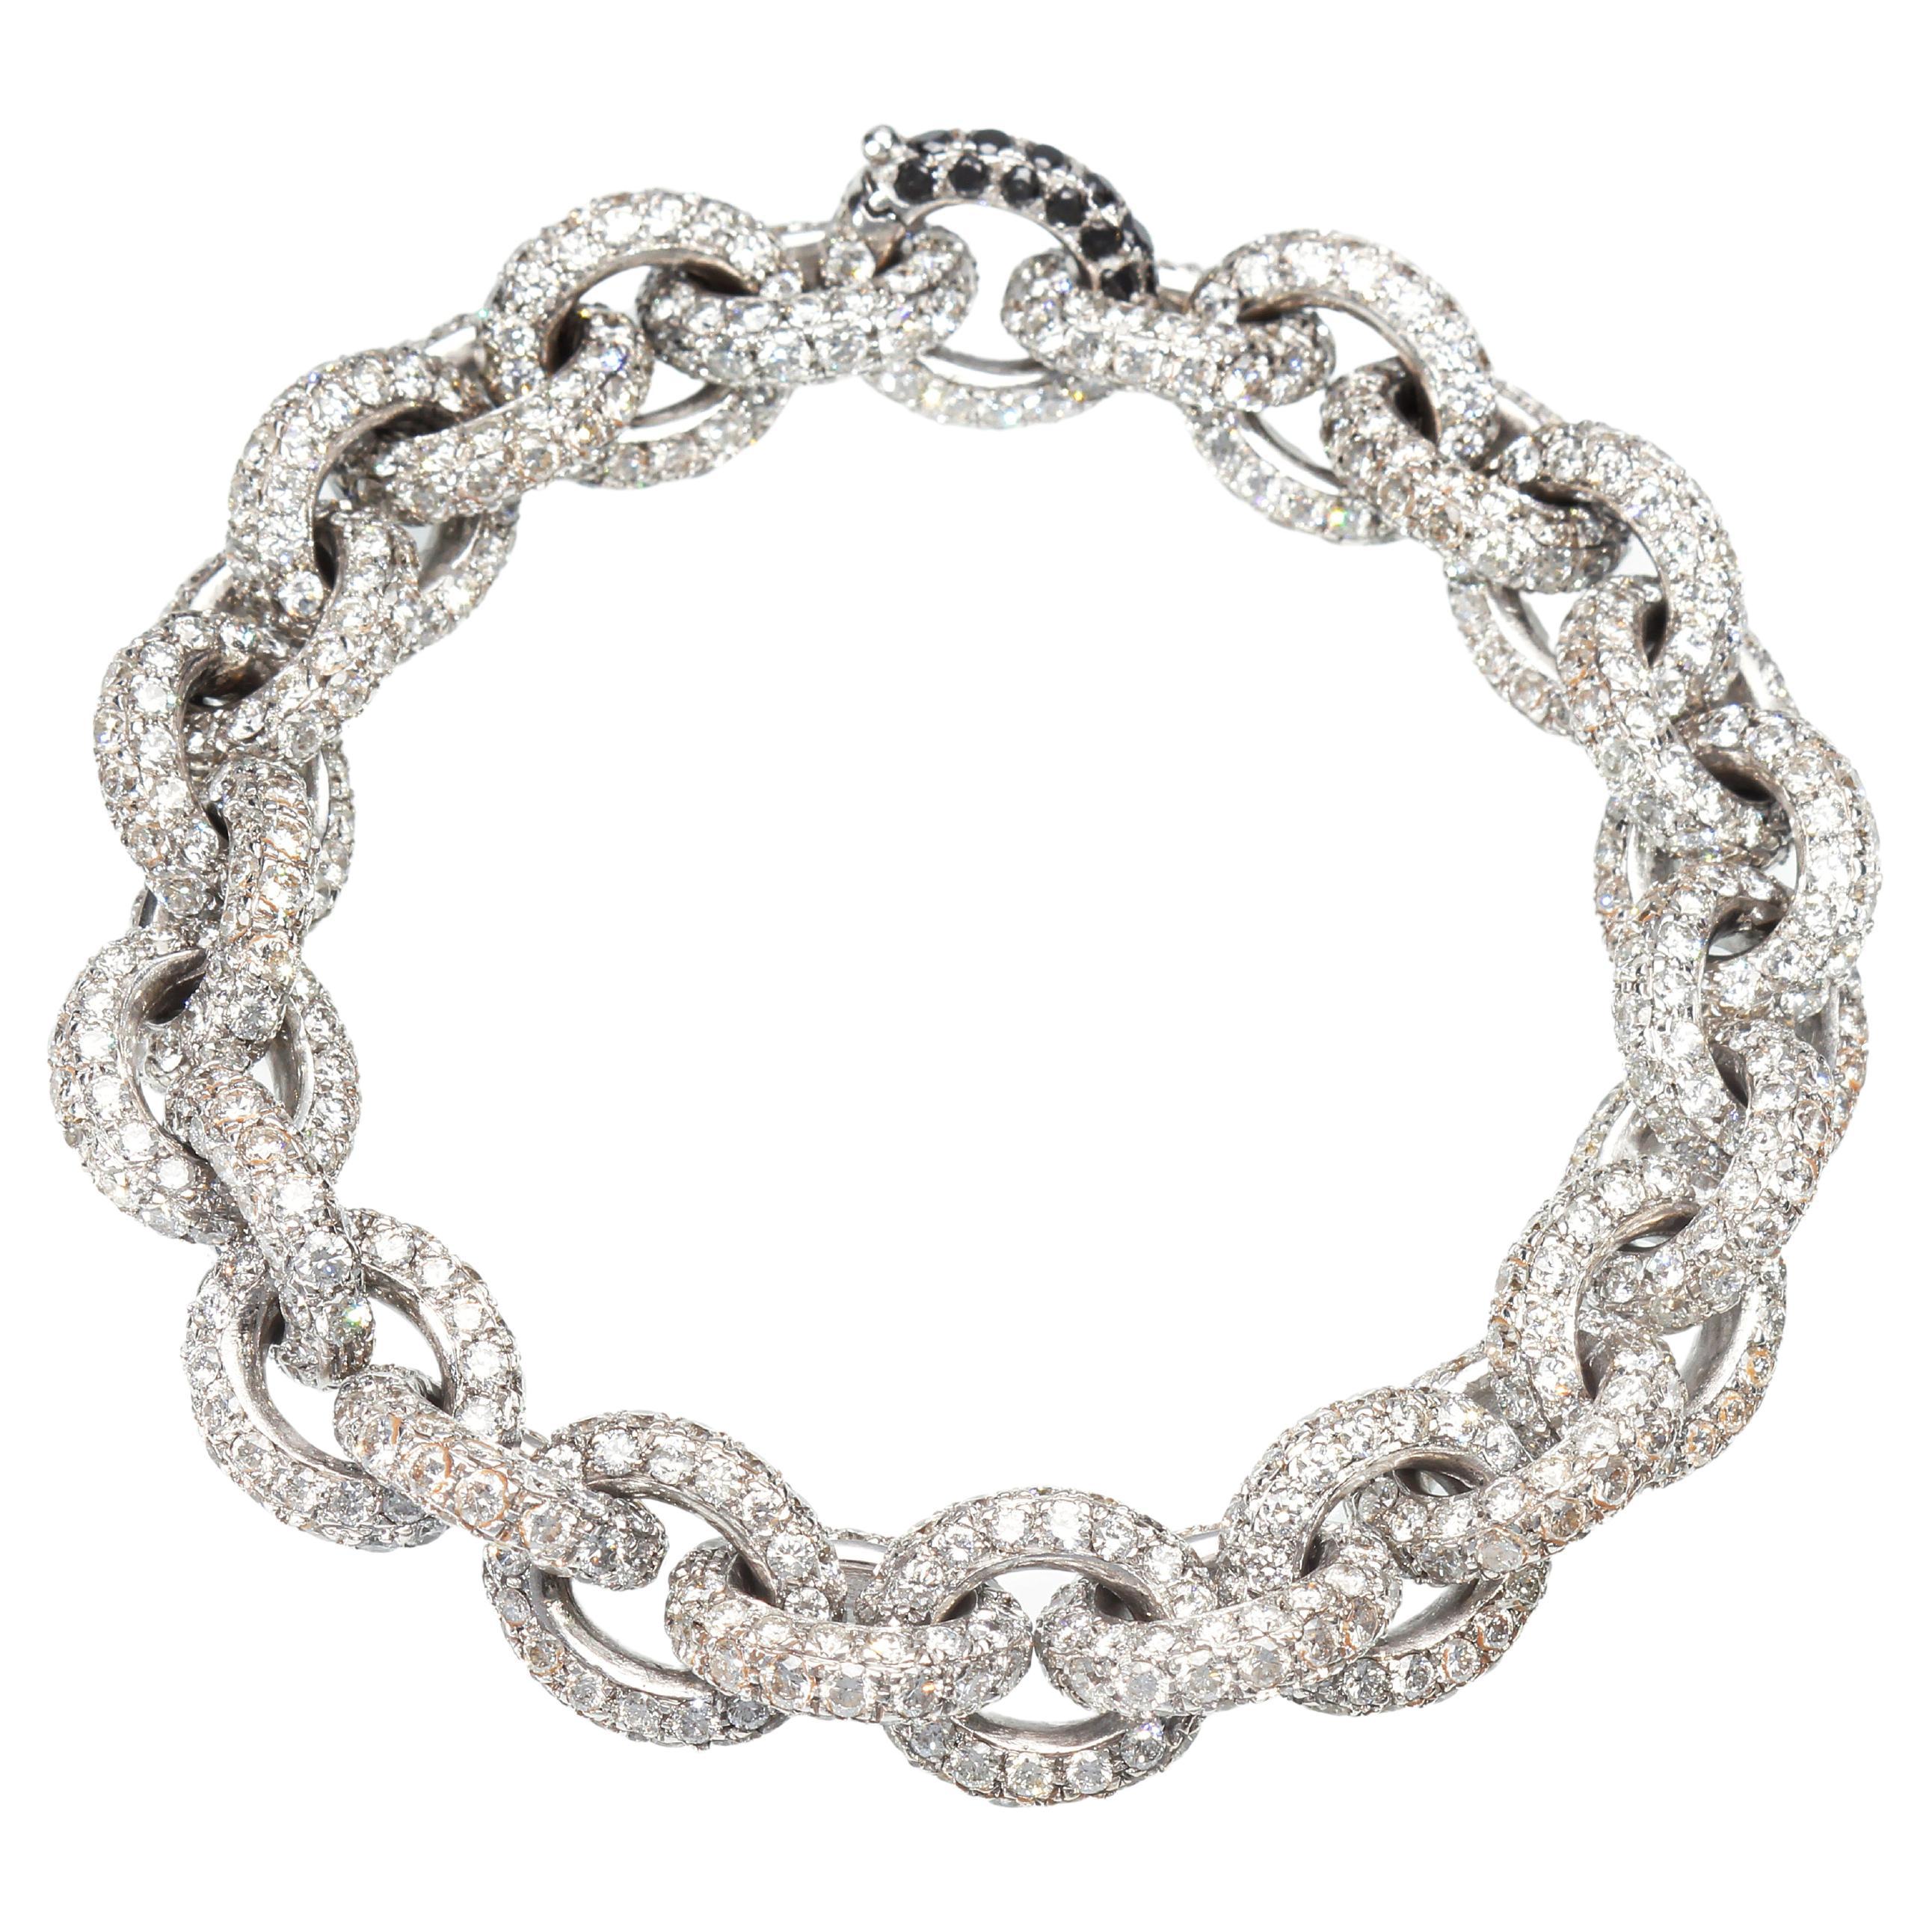 Chain Bracelet with 30.76 Ct of White Diamonds. Handmade. Made in Italy For Sale